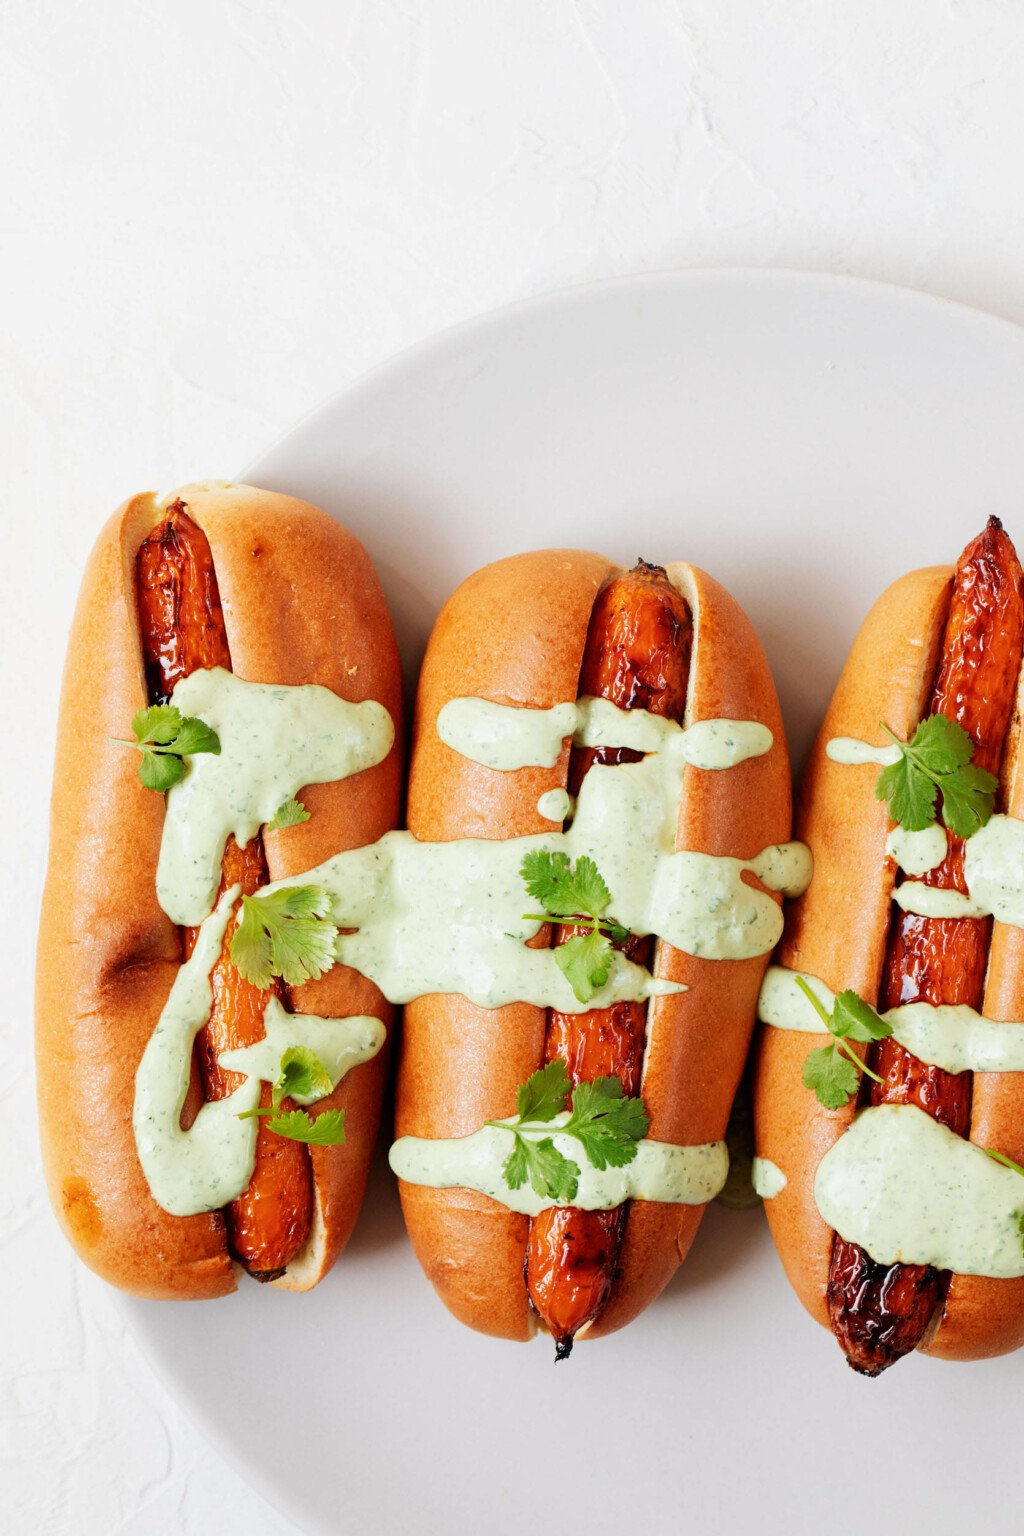 Carrot dogs, topped with a bright green sauce and chopped fresh herbs, are arranged on a round, white plate.